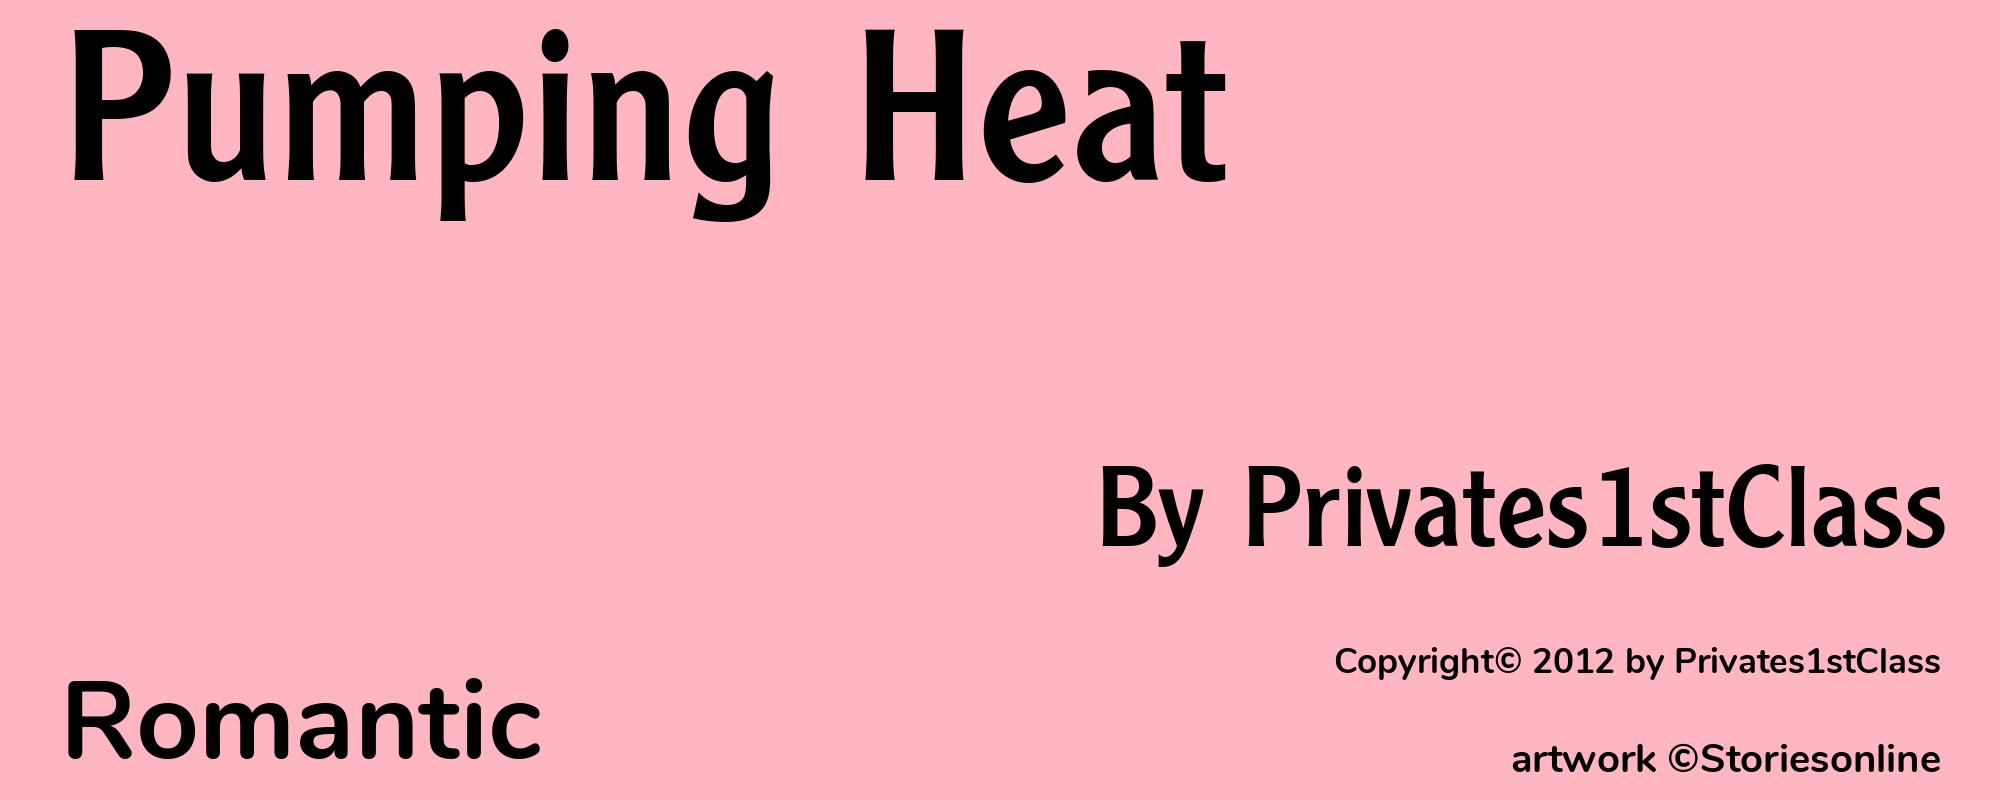 Pumping Heat - Cover